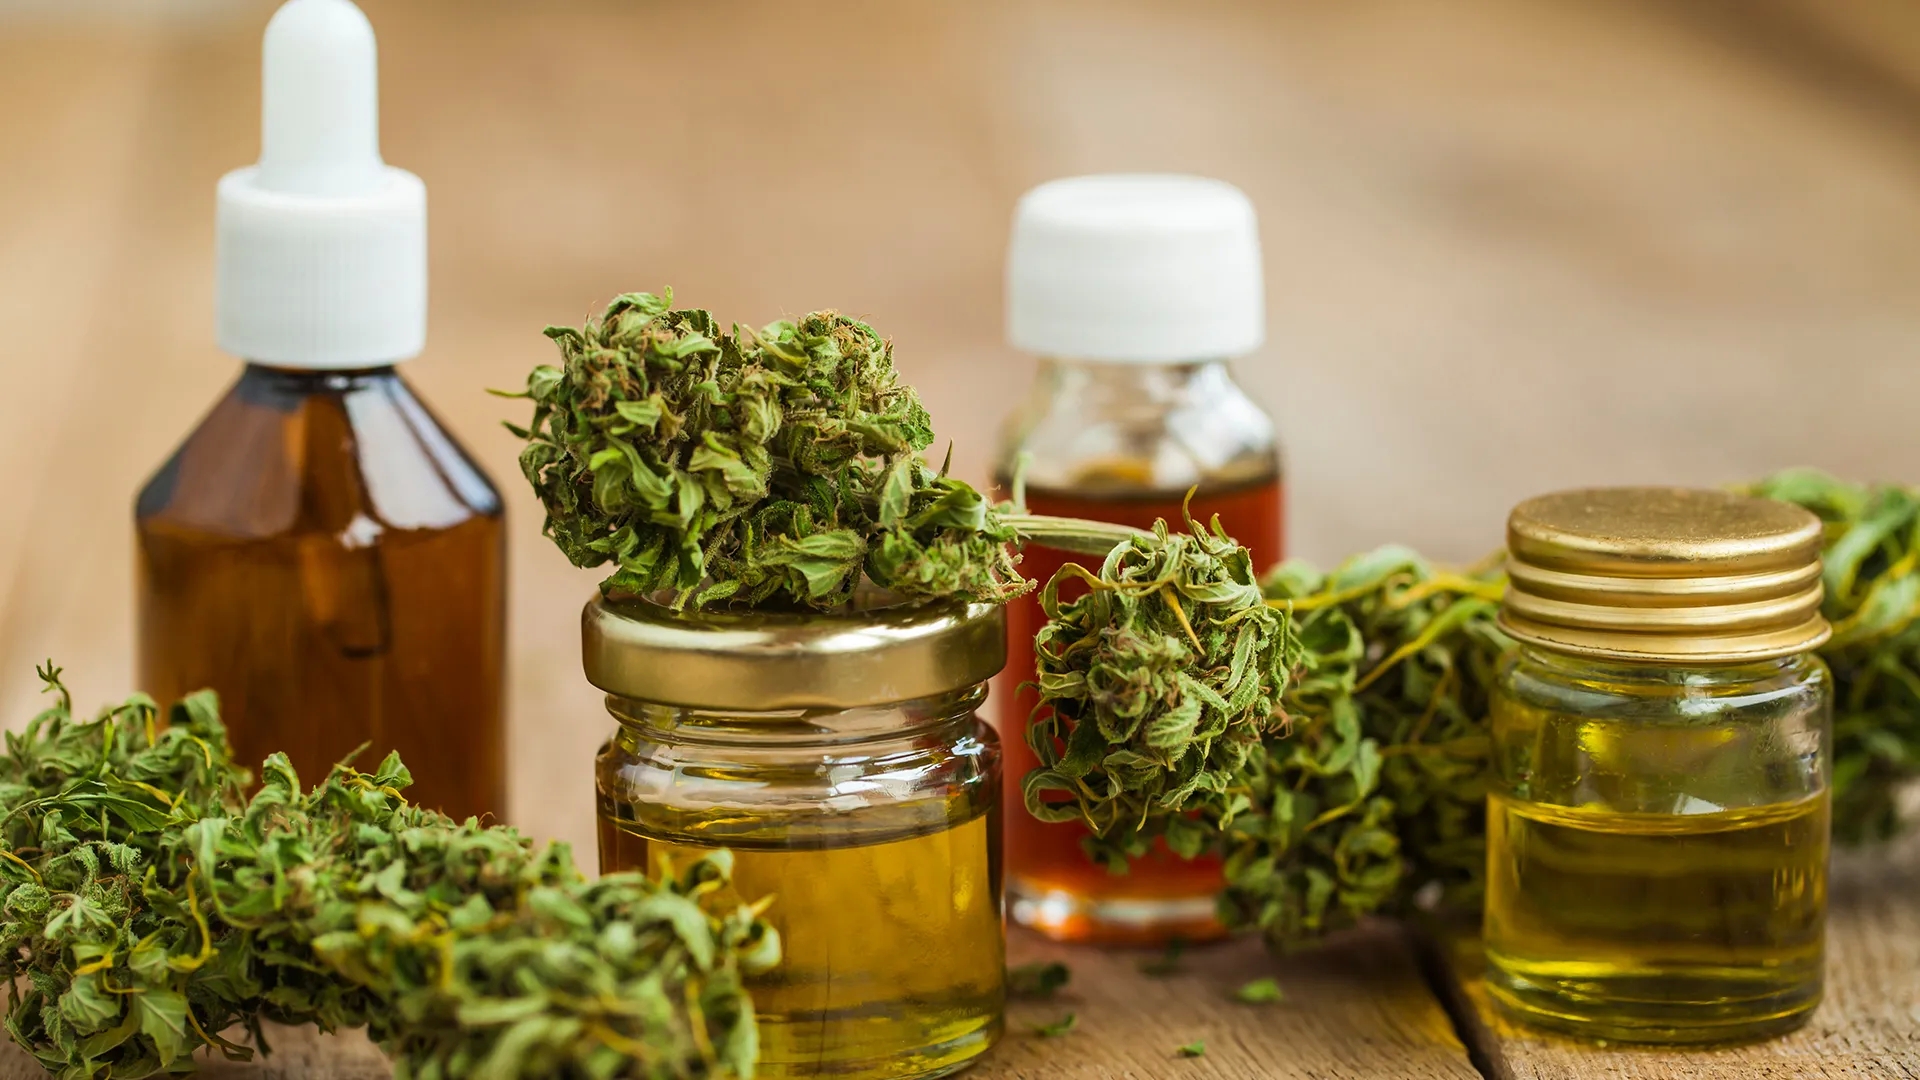 Flower Strains Have Made CBD Products Accessible